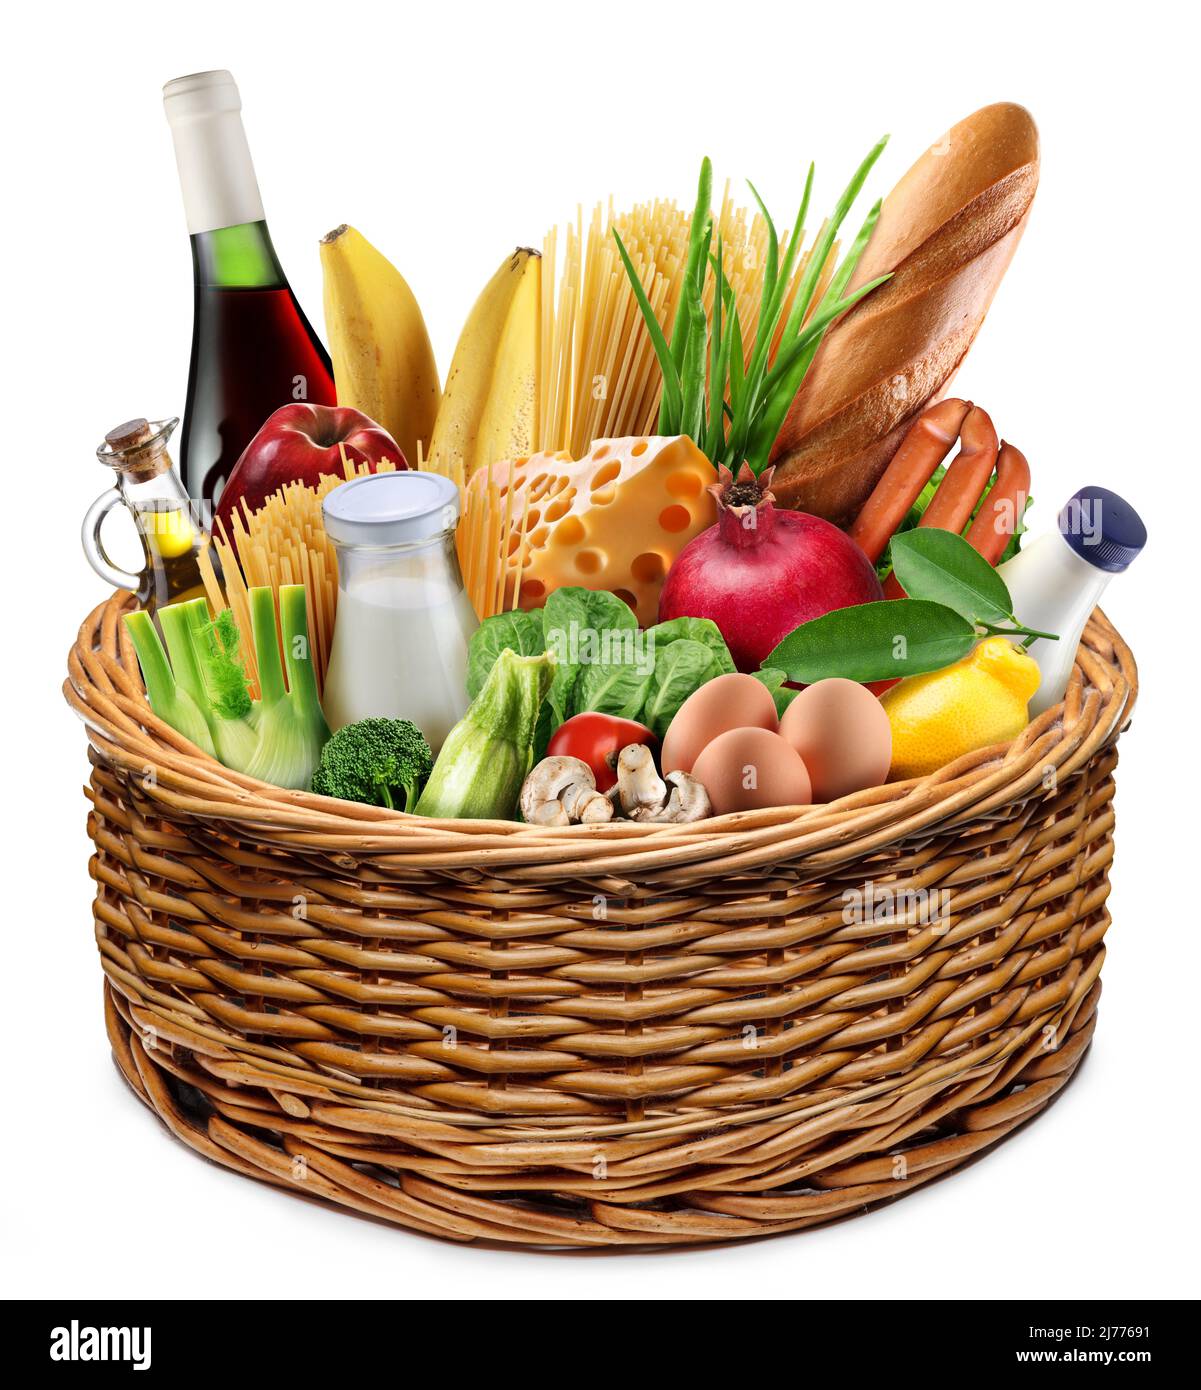 Food basket. Vast of different vegetables and products in the wicker basket on white background. Stock Photo